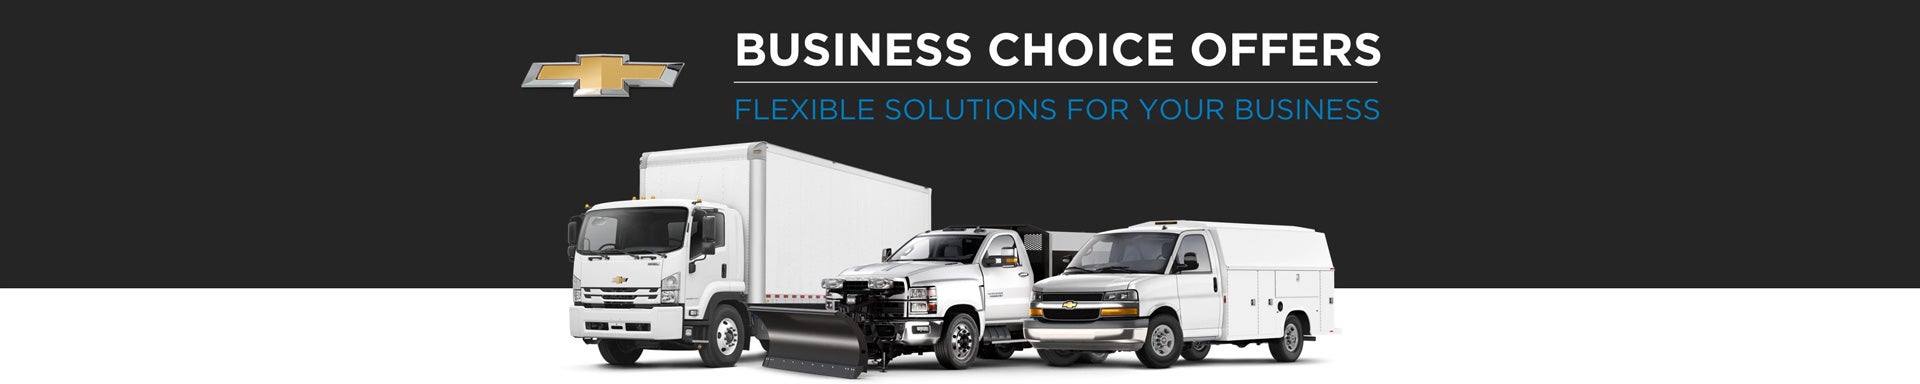 Chevrolet Business Choice Offers - Flexible Solutions for your Business - Stanley Chevrolet in McCordsville IN